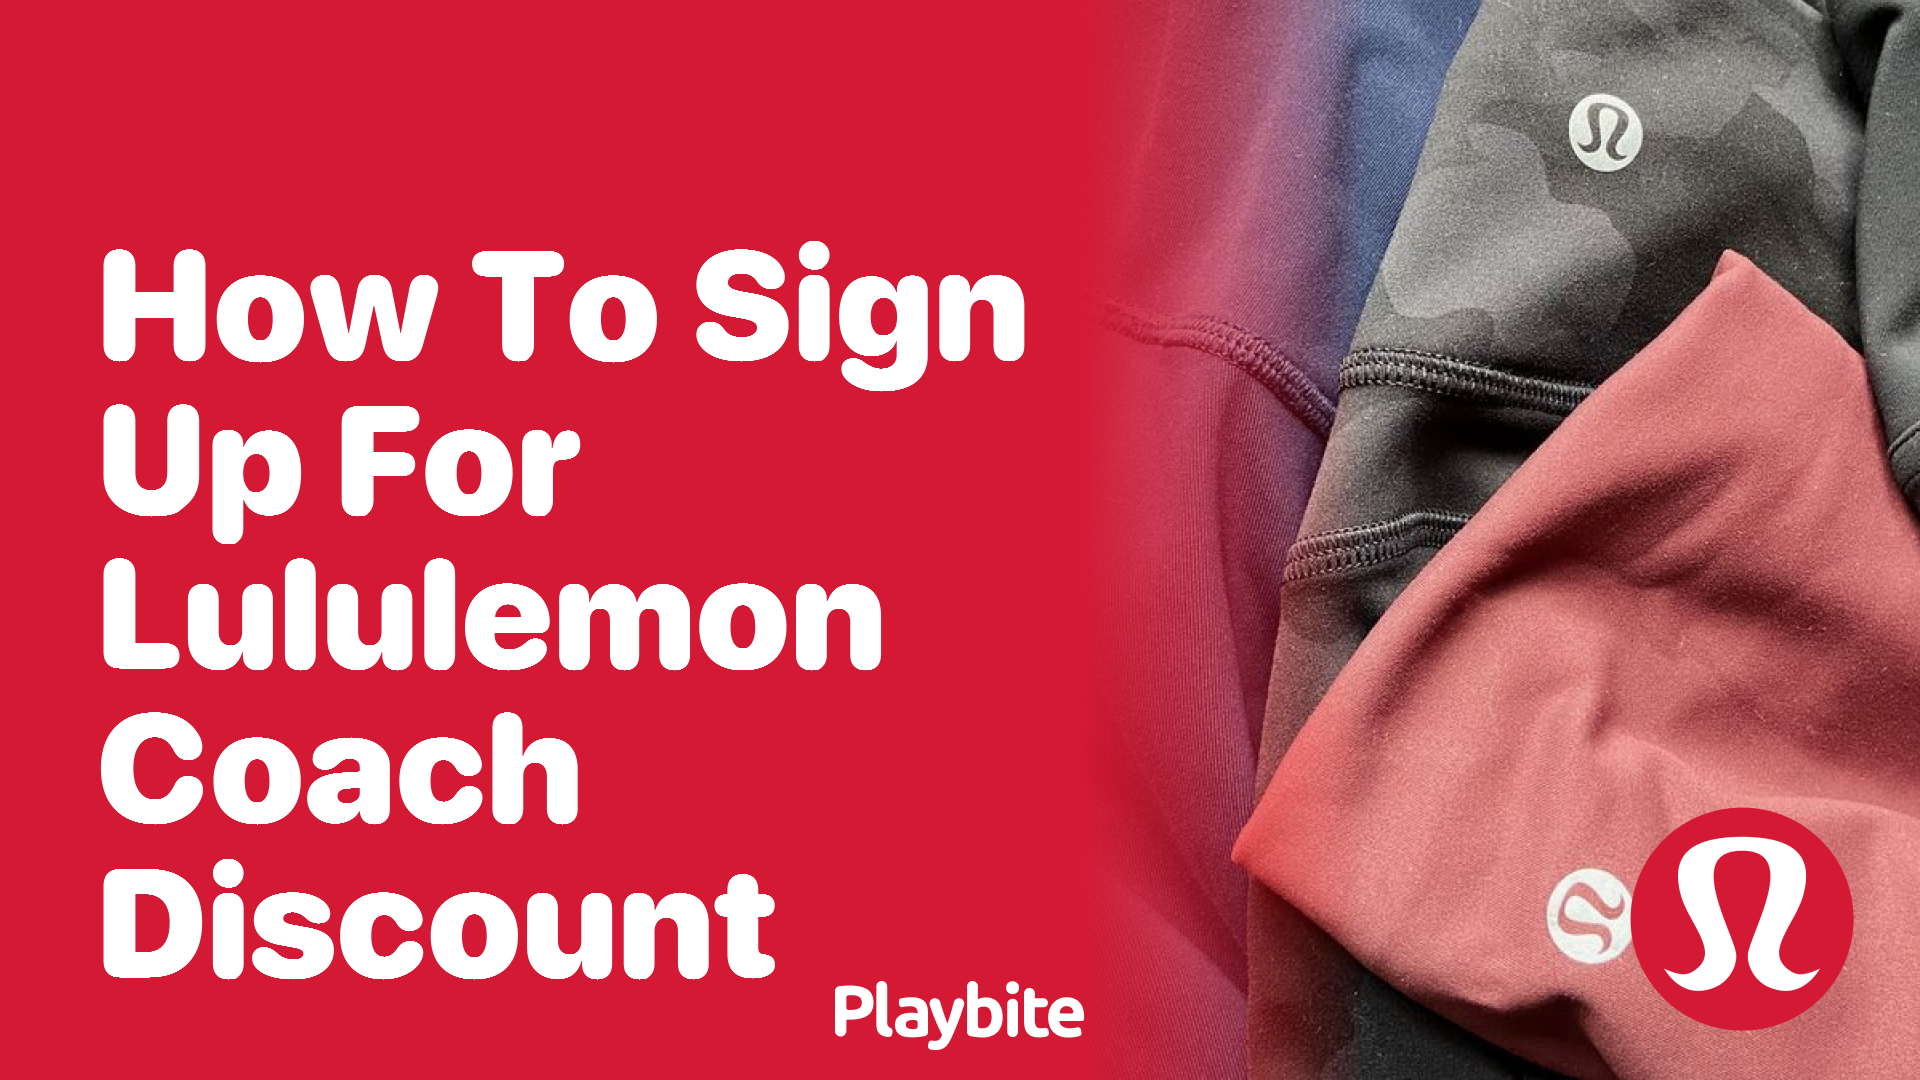 How to Sign Up for Lululemon Coach Discount